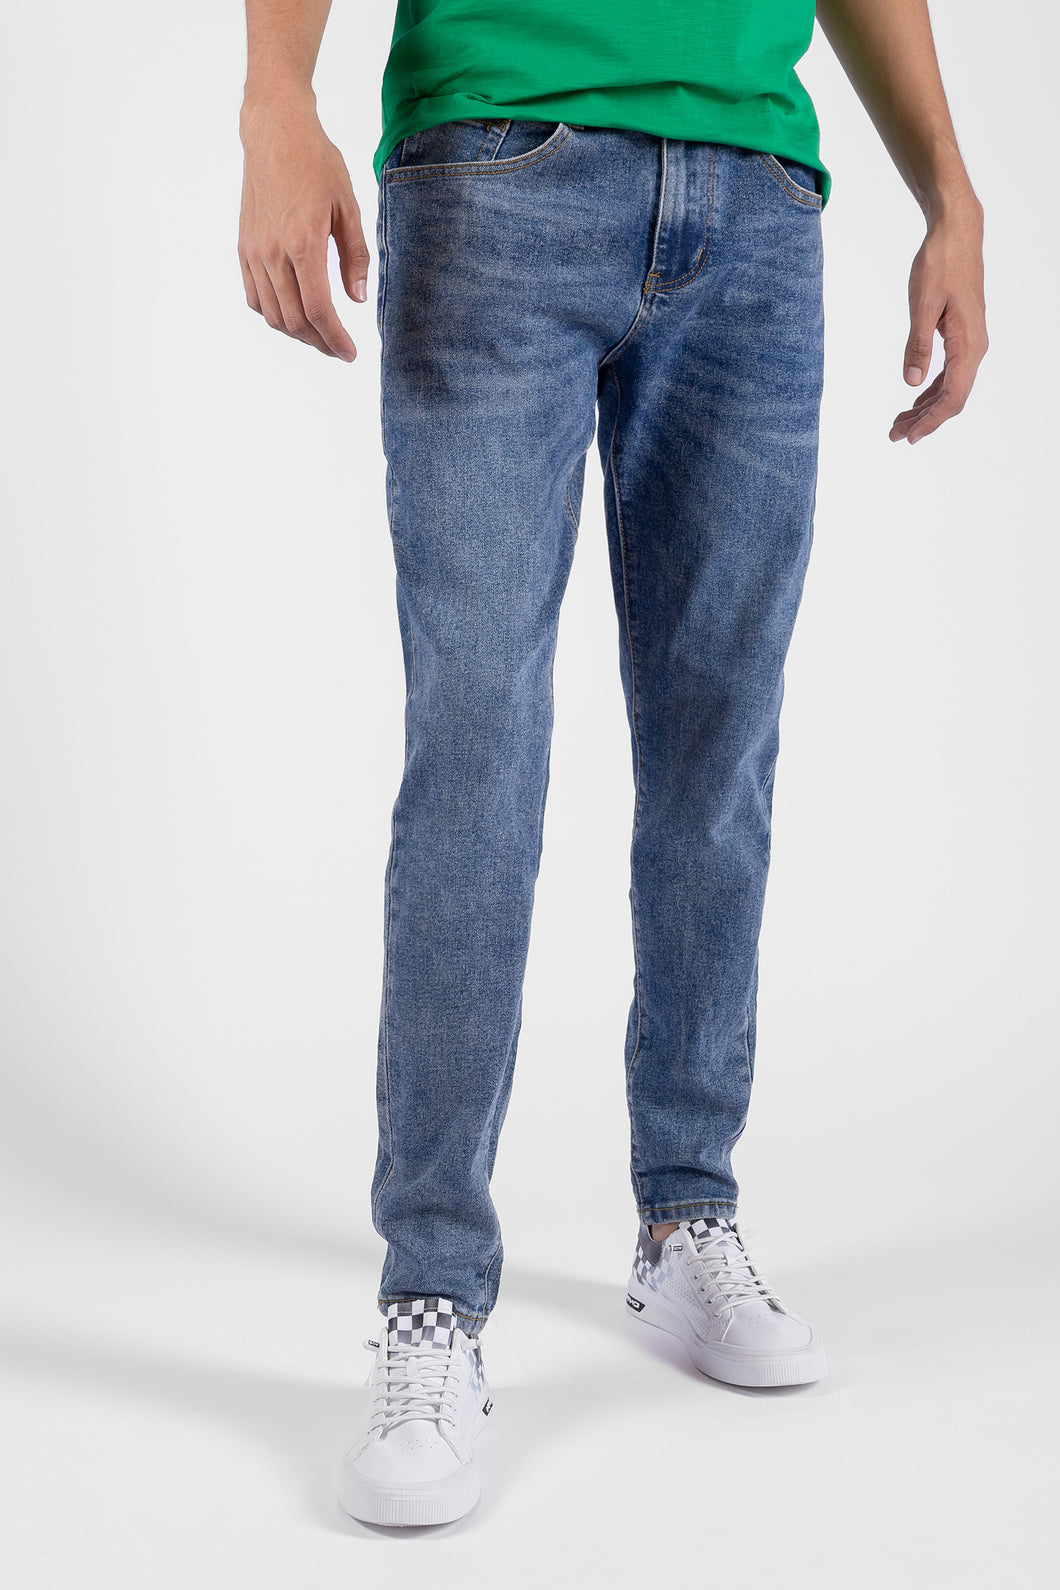 Jean Skinny Fit - Hombre